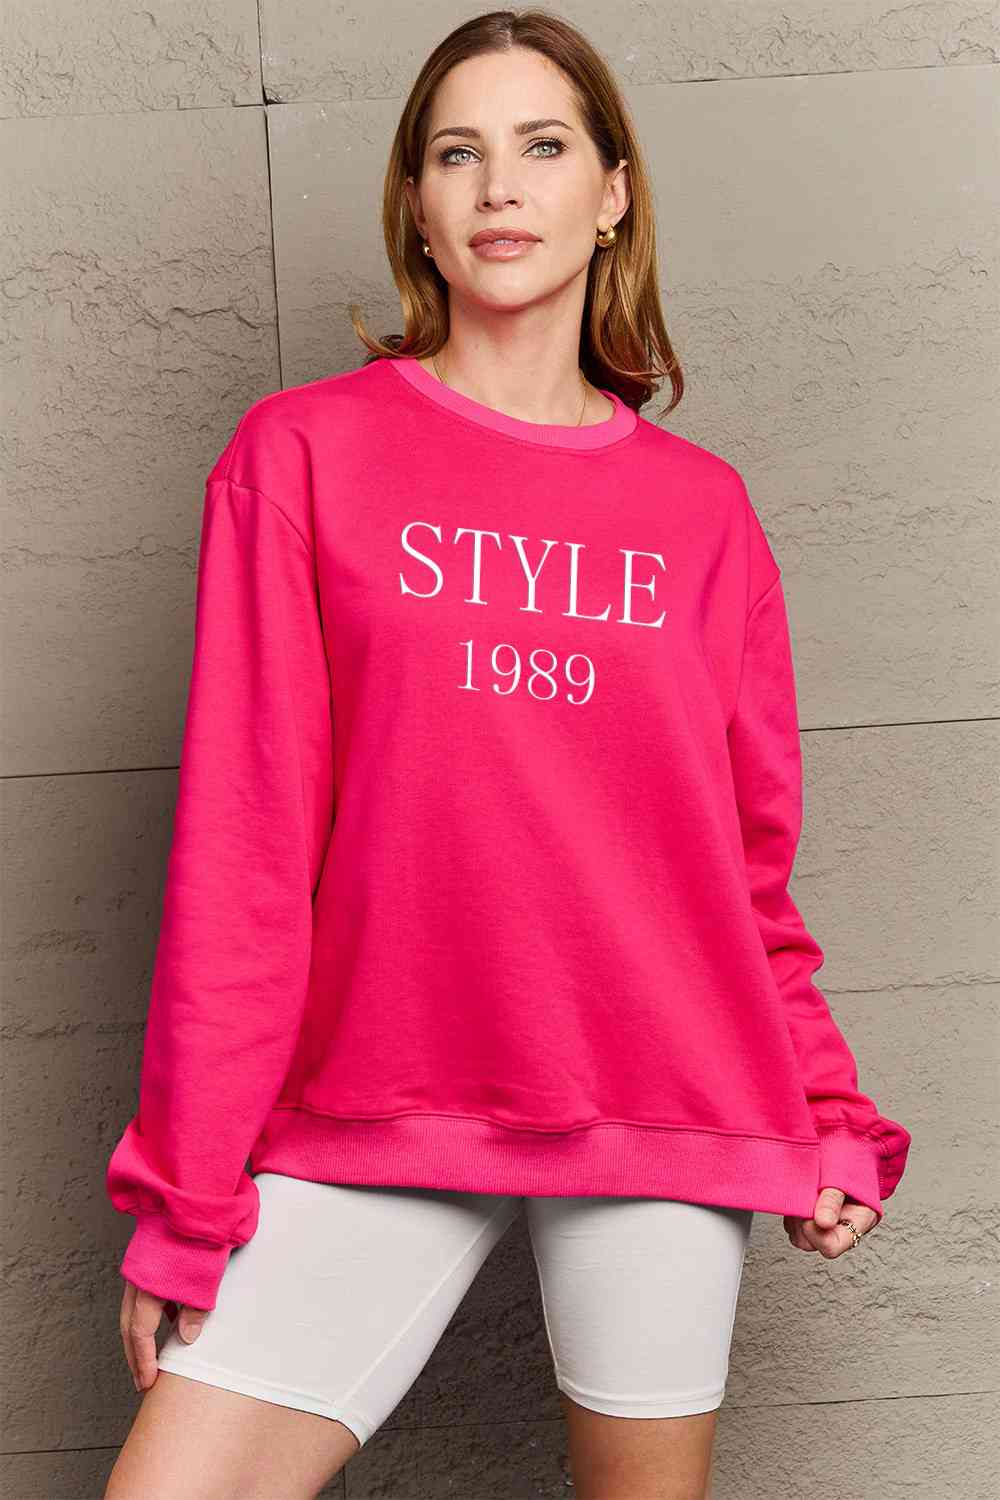 Simply Love Full Size STYLE 1989 Graphic Sweatshirt